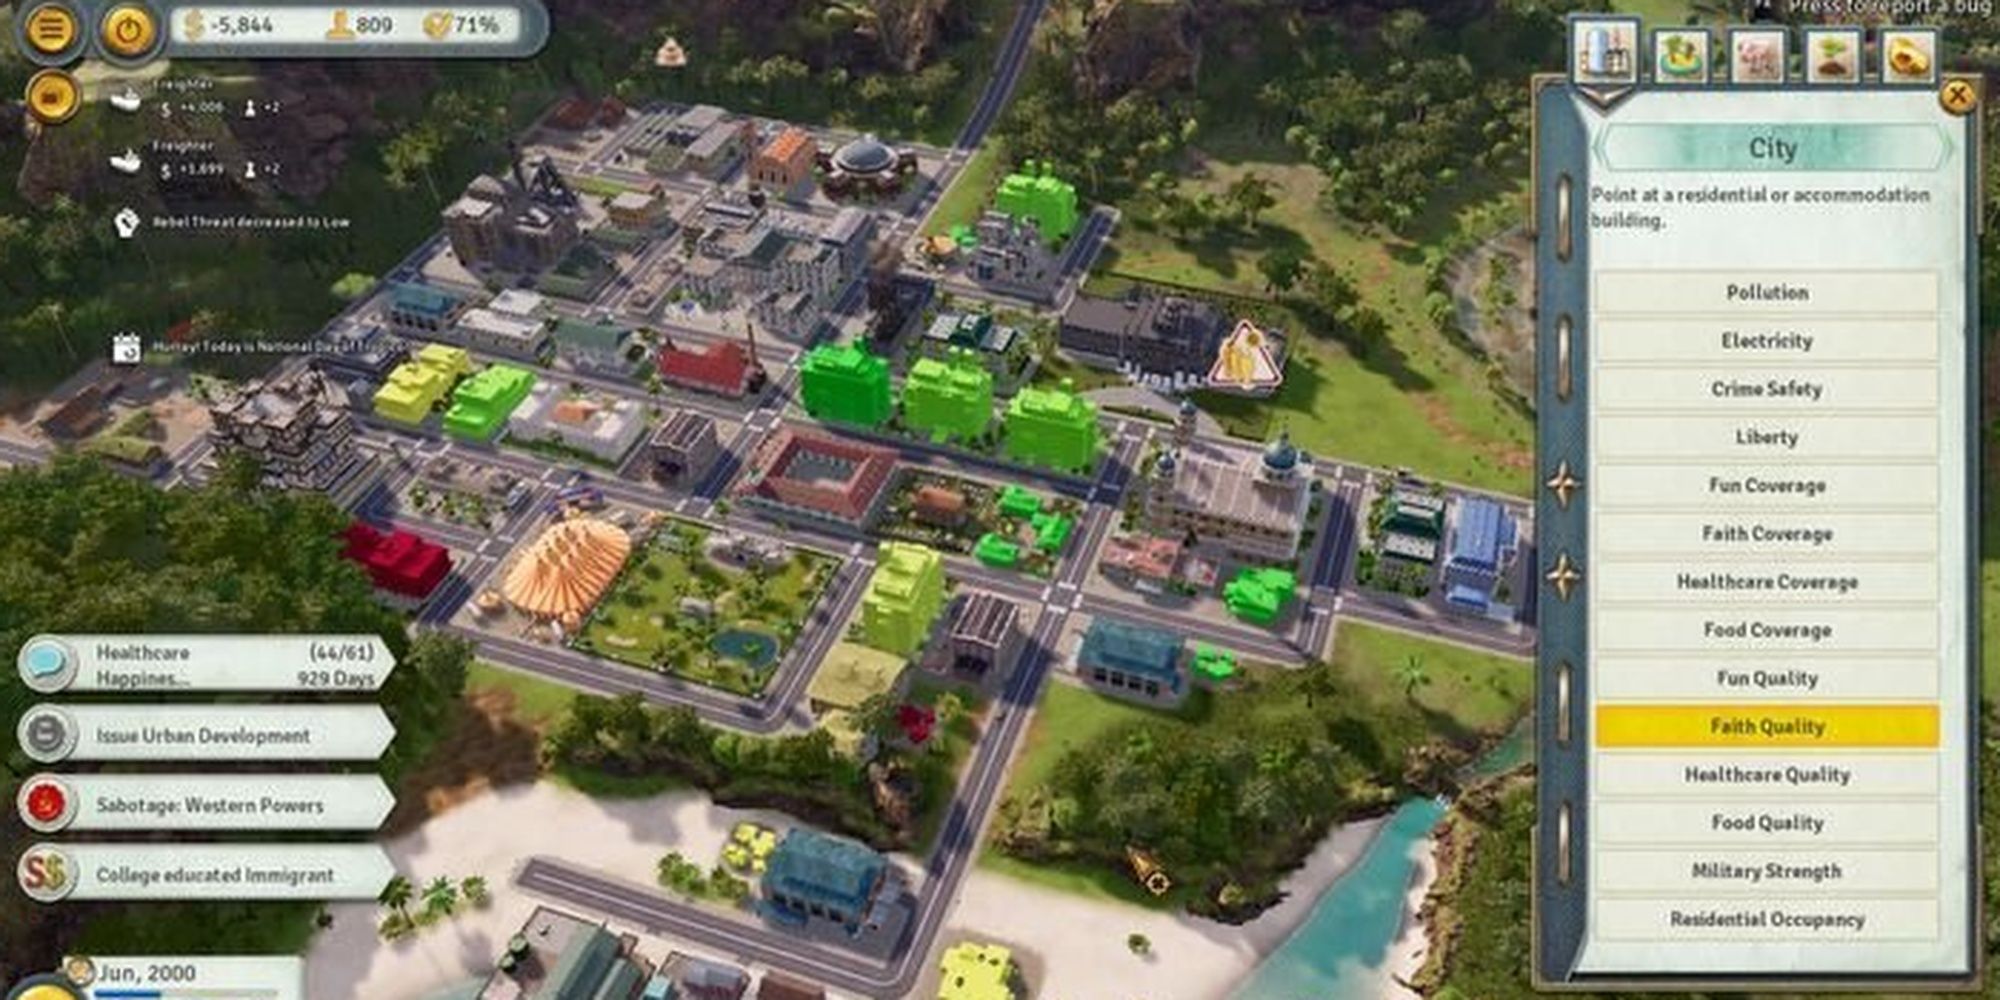 Tropico 6 Options For Different Factors That Affect Approval Ratings